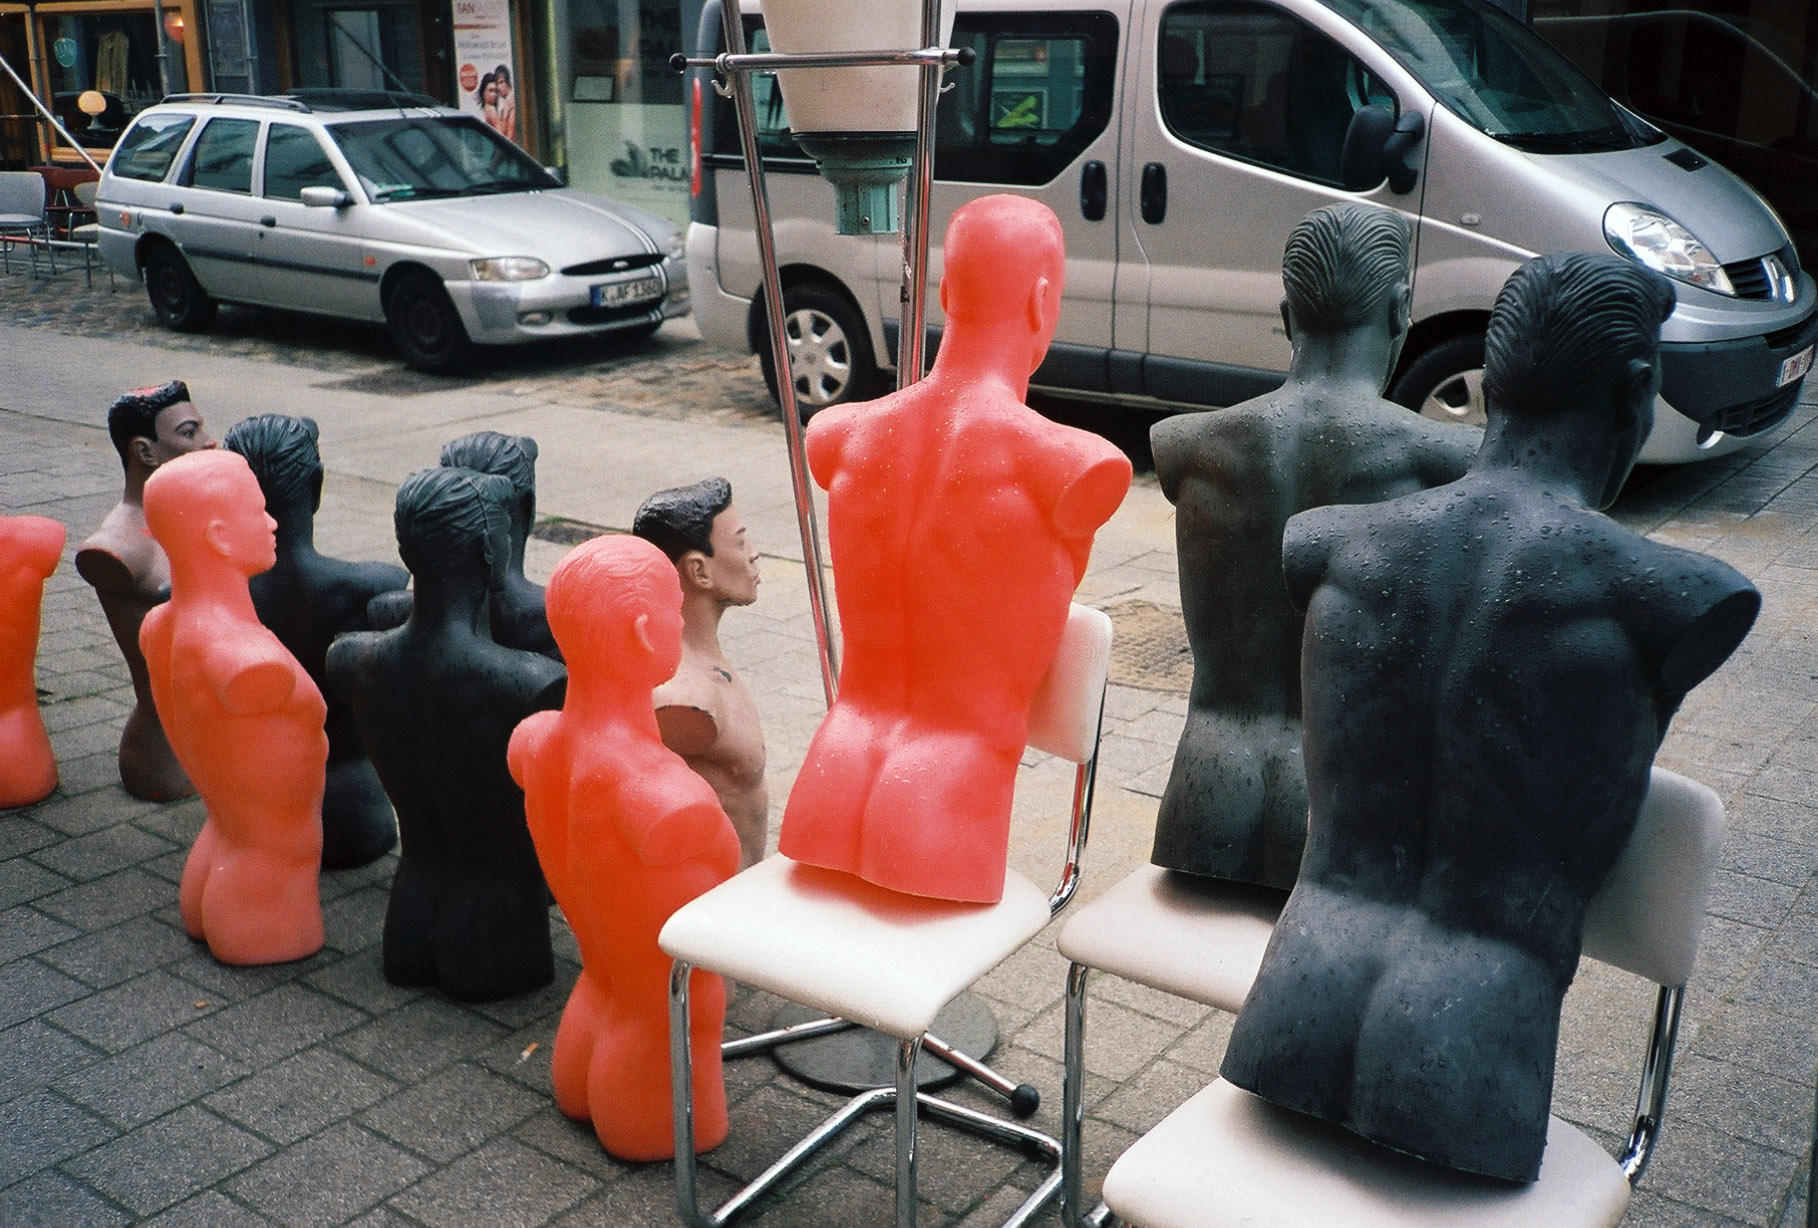 backside view of a group of display mannequins without arms or legs